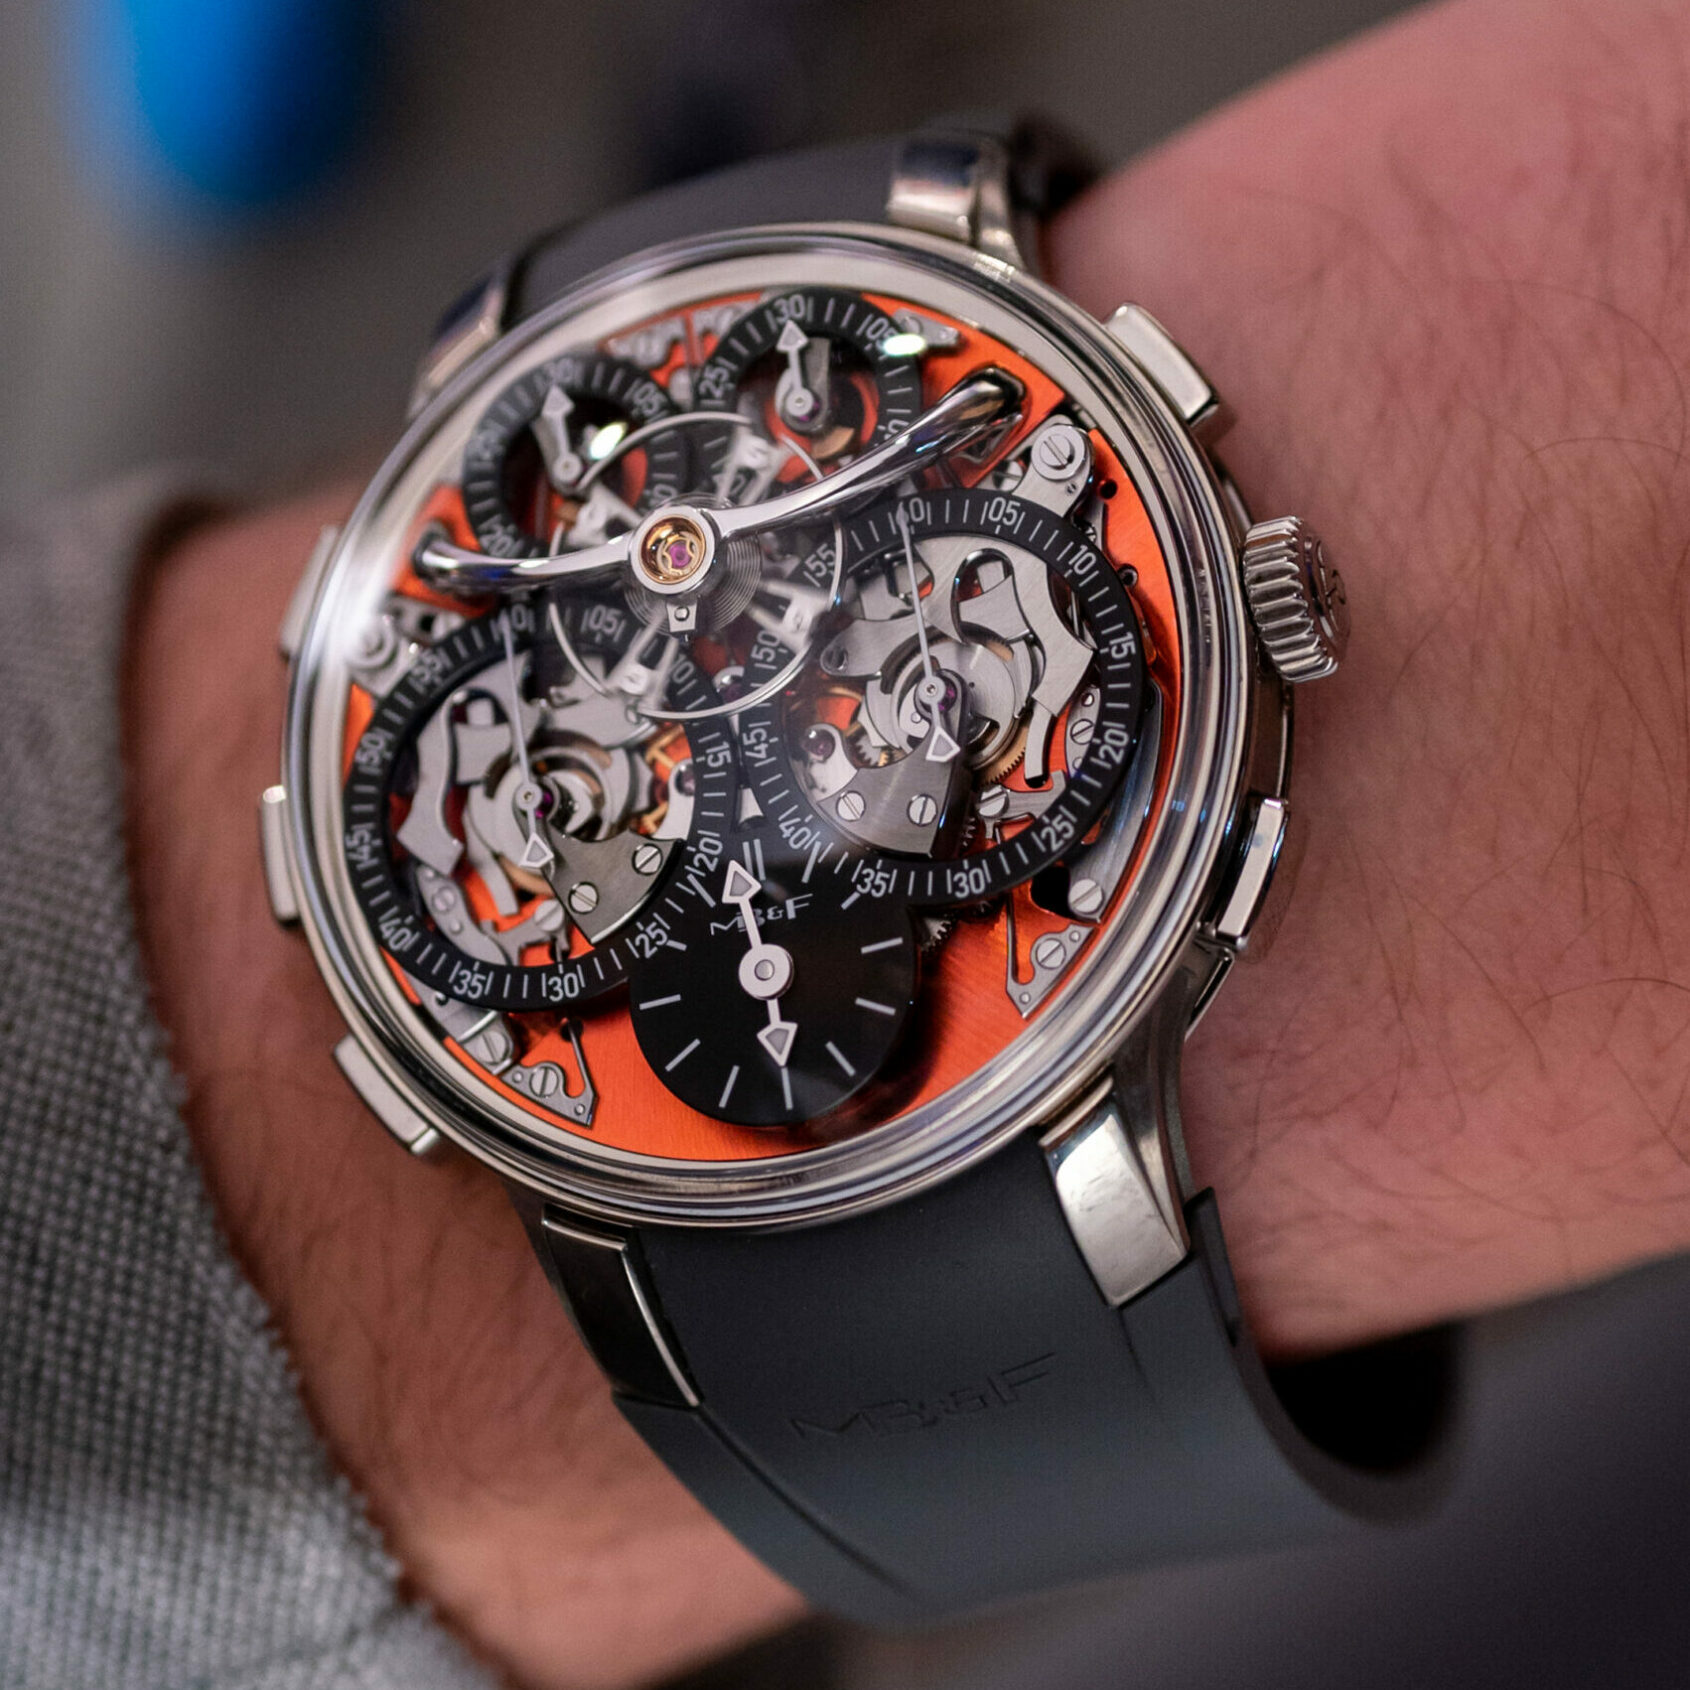 MB&F Sequential EVO takes home the “Aiguille d’Or” Grand Prix prize at 2022 GPHG Awards